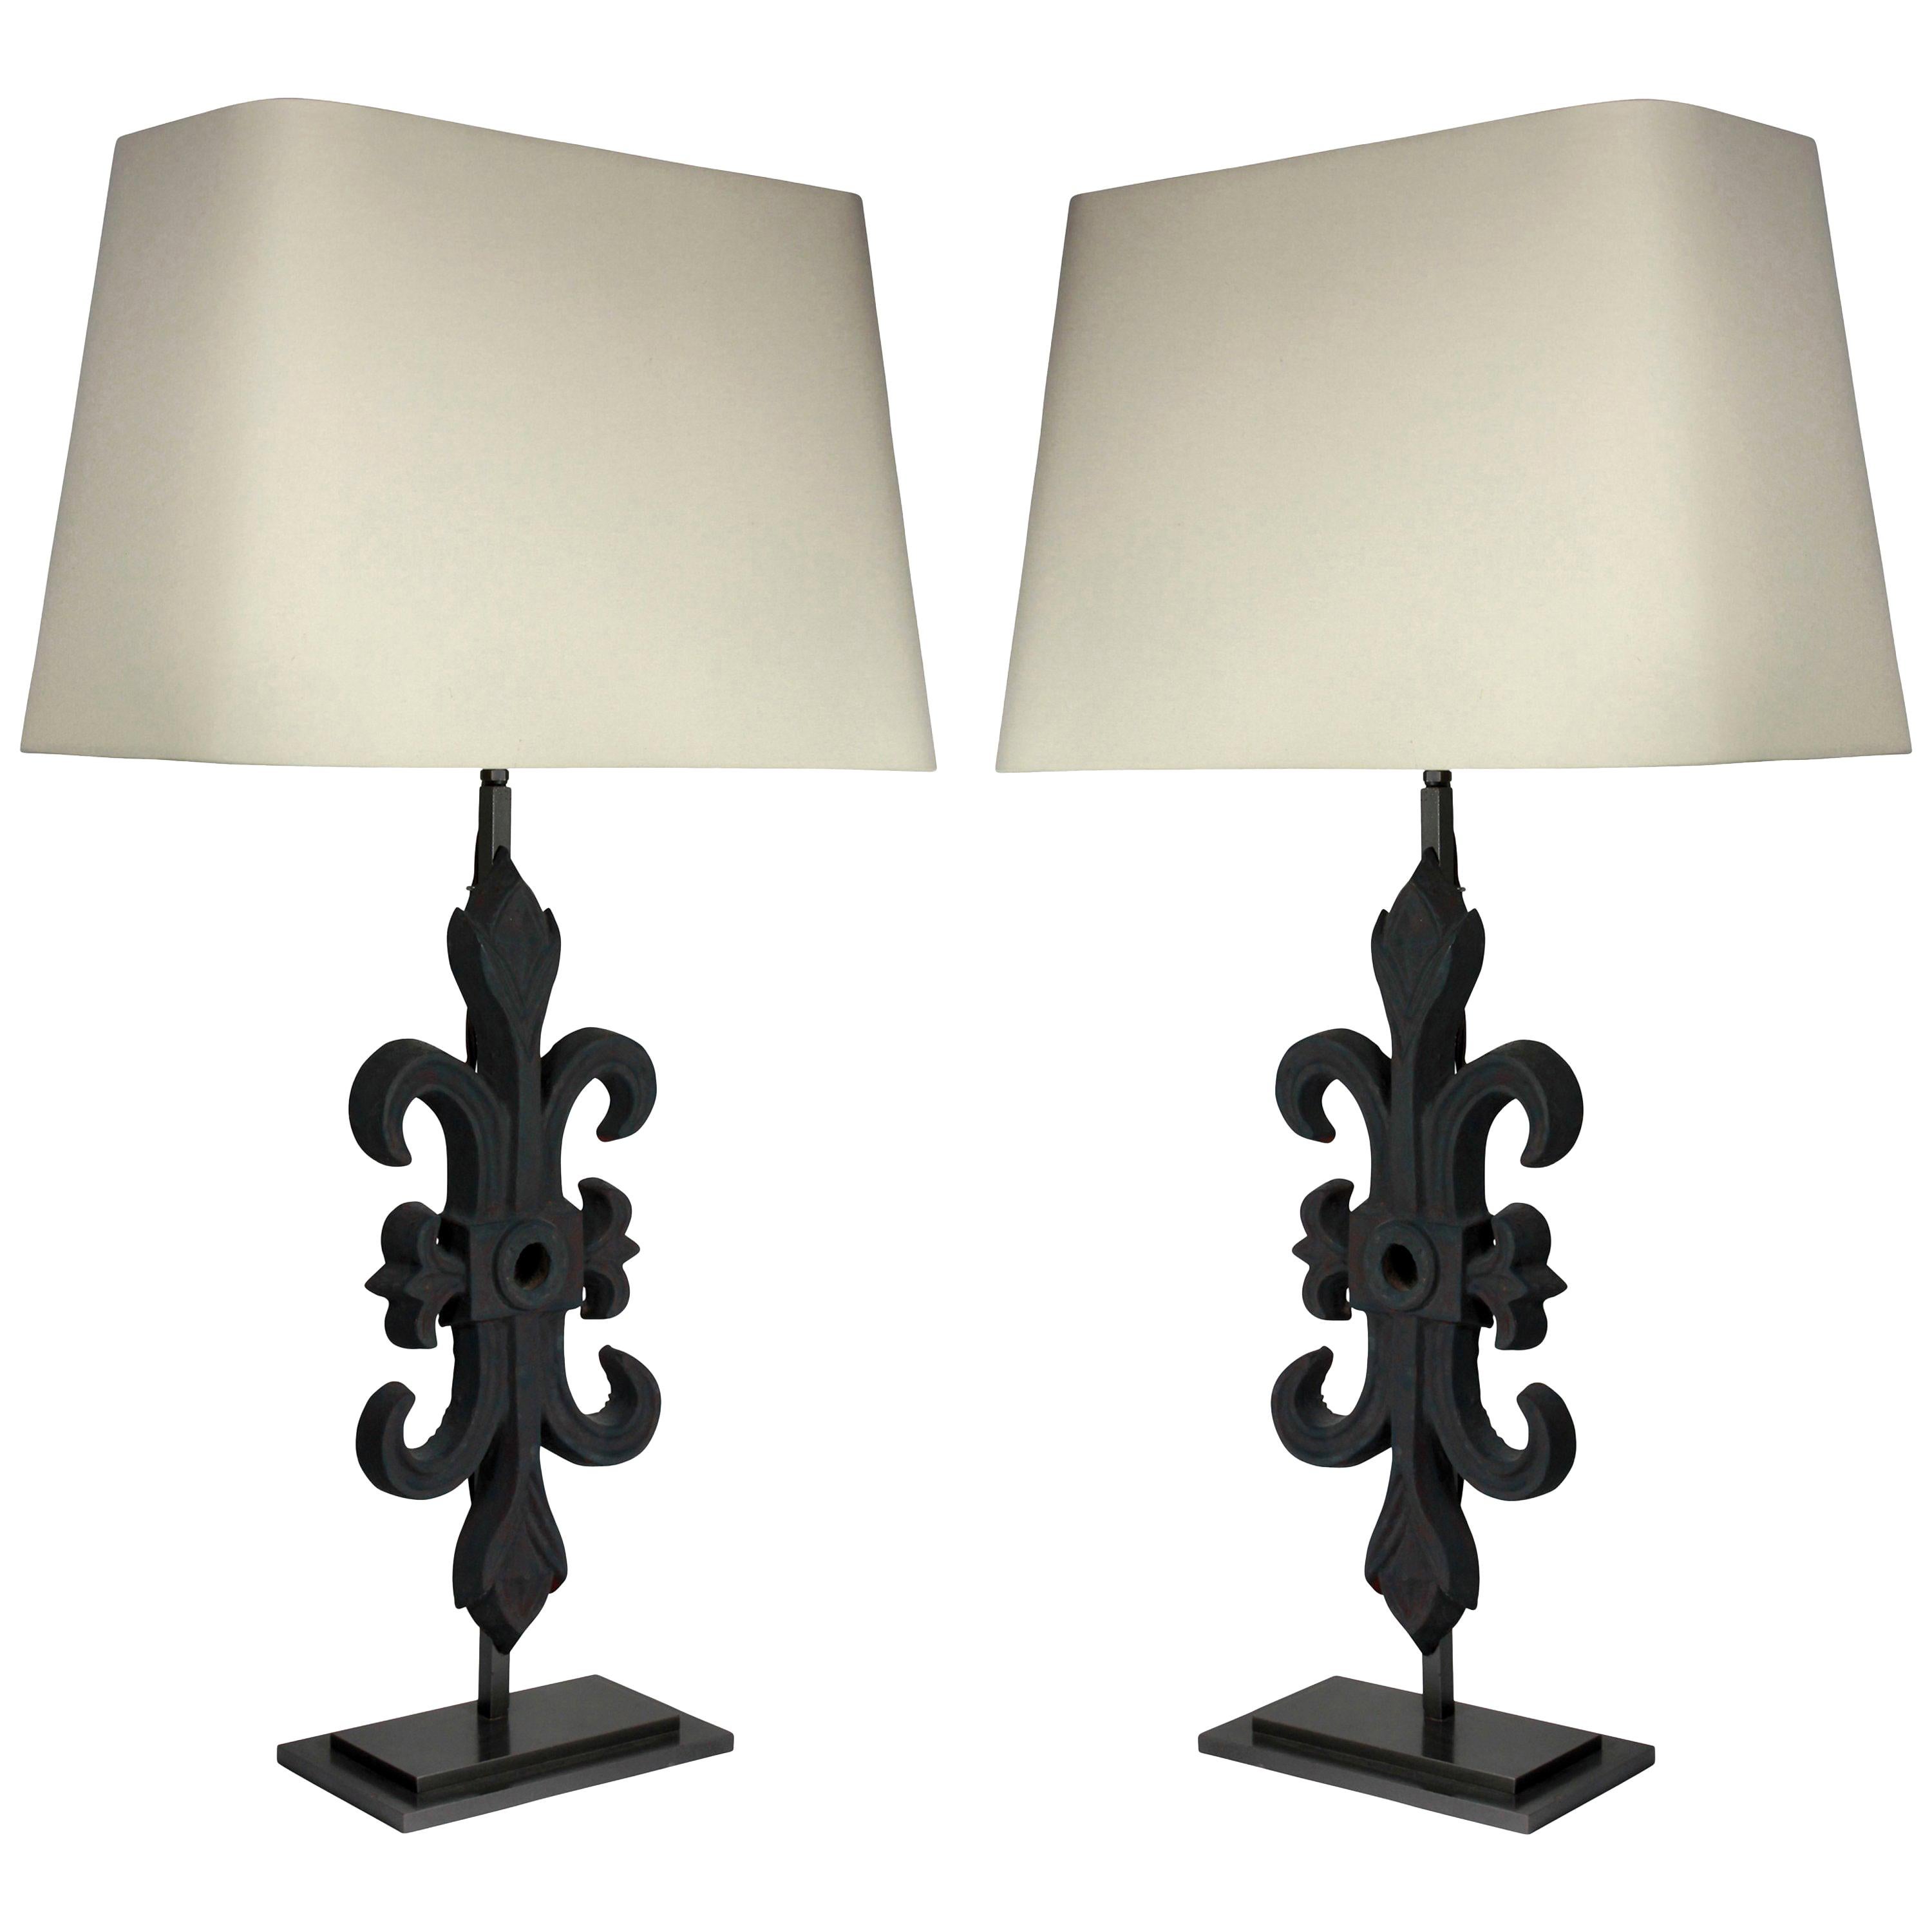 Pair of Architectural Table Lamps